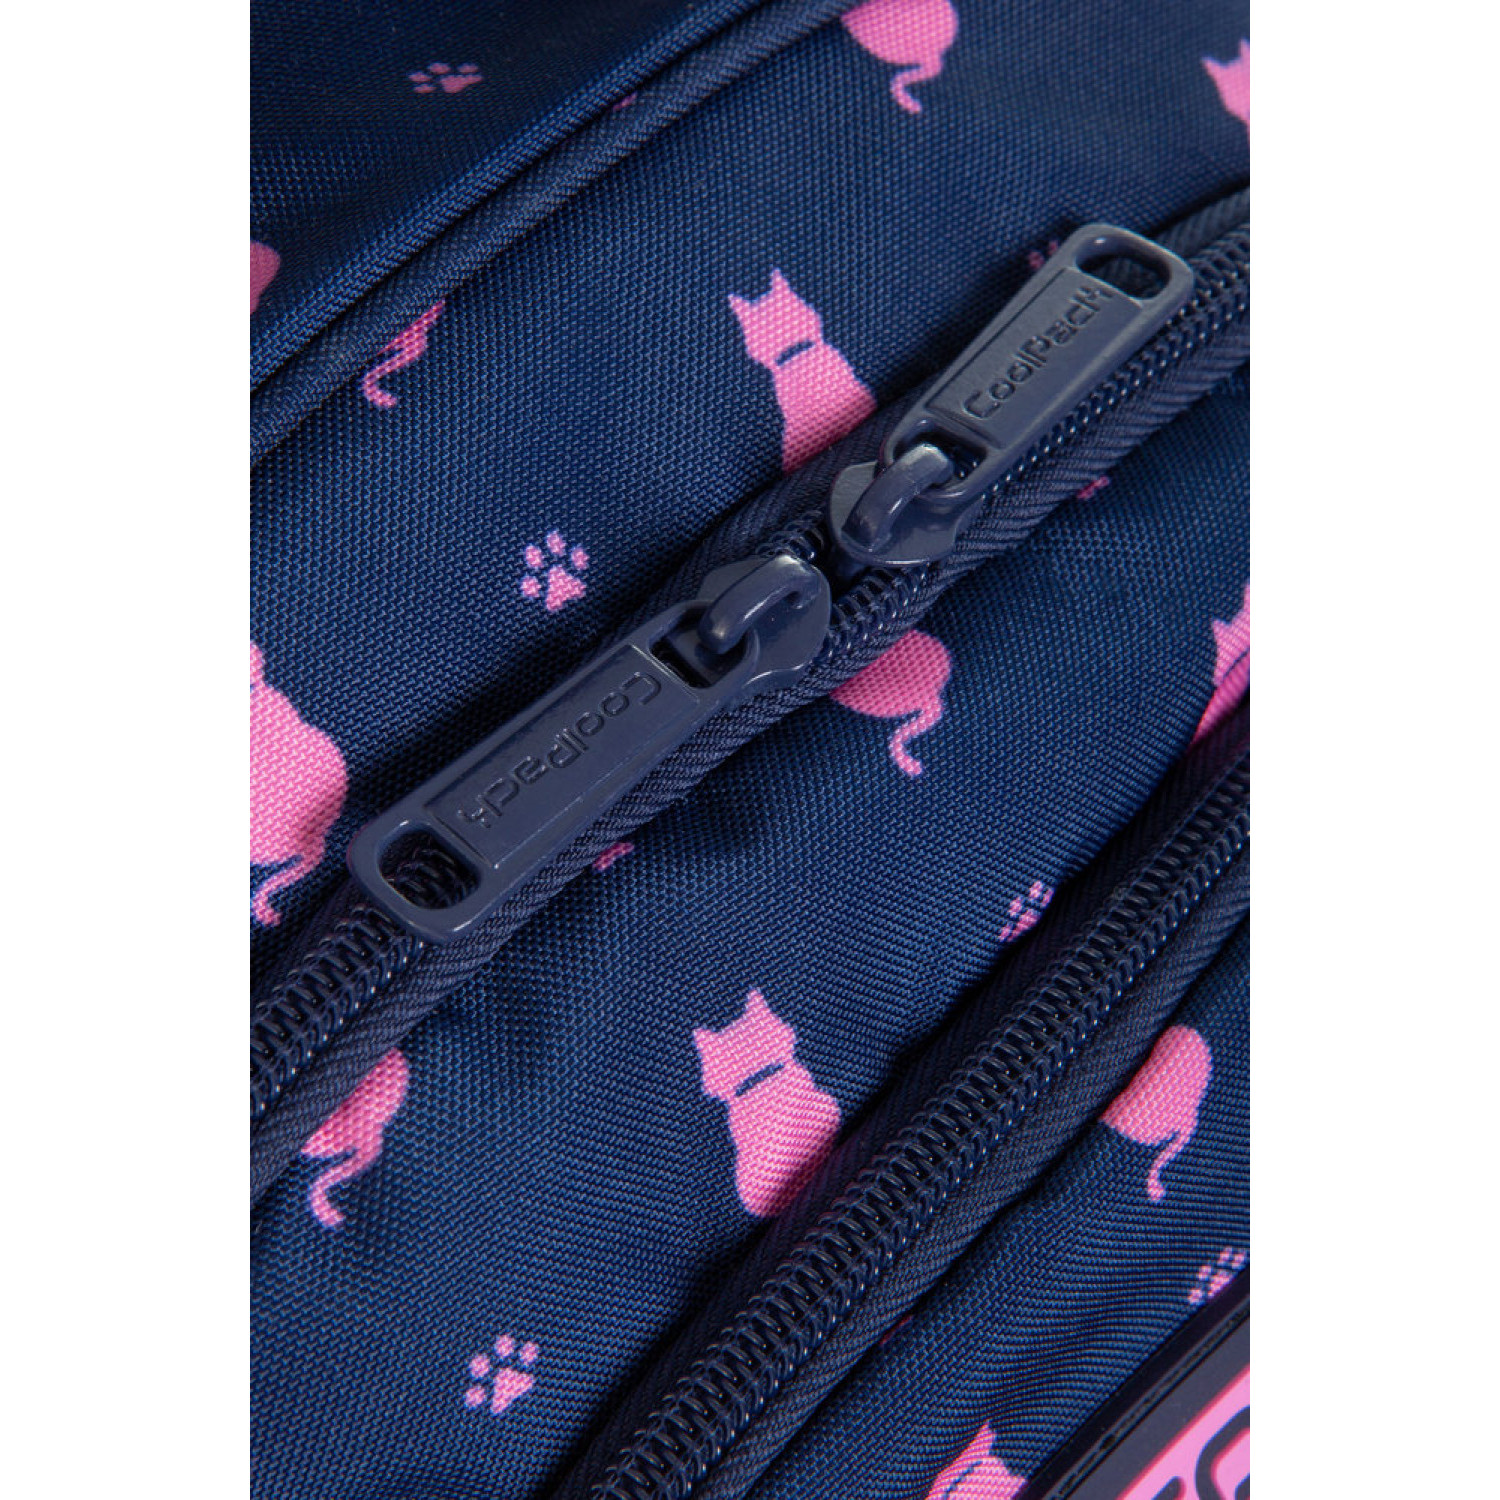 Раница Coolpack Starr Navy Kitty, на колелца